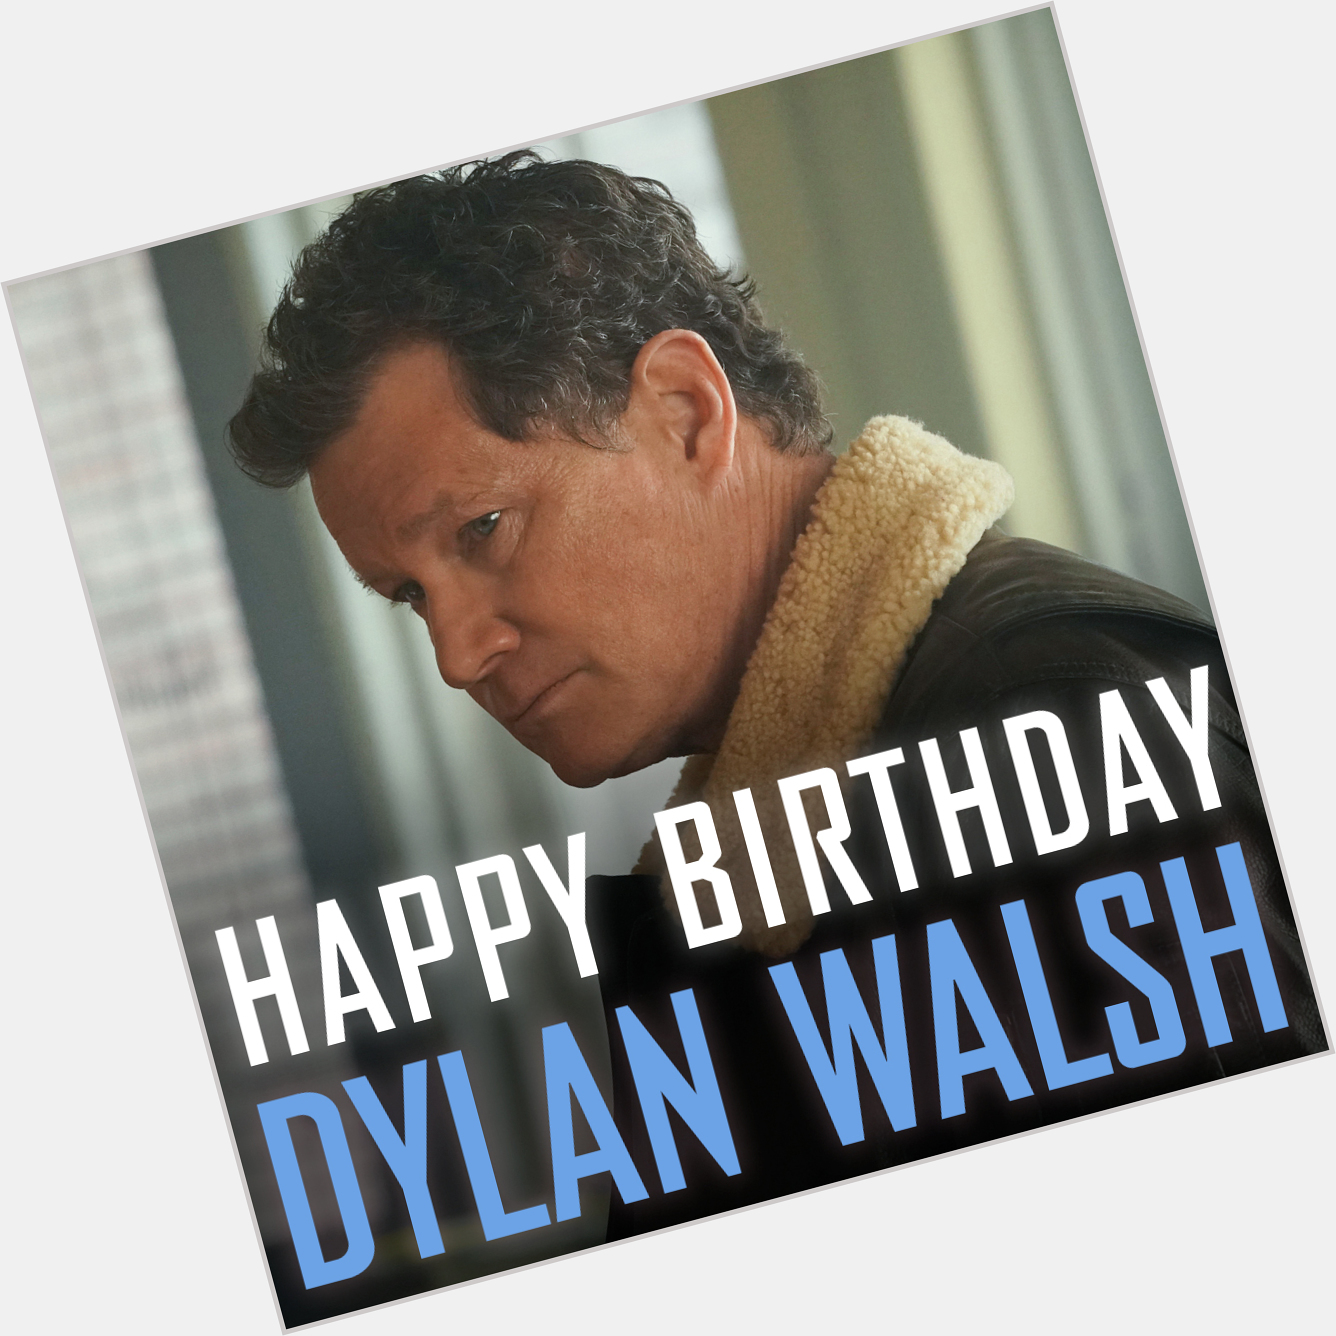 Always ready for action. Happy birthday, Dylan Walsh 